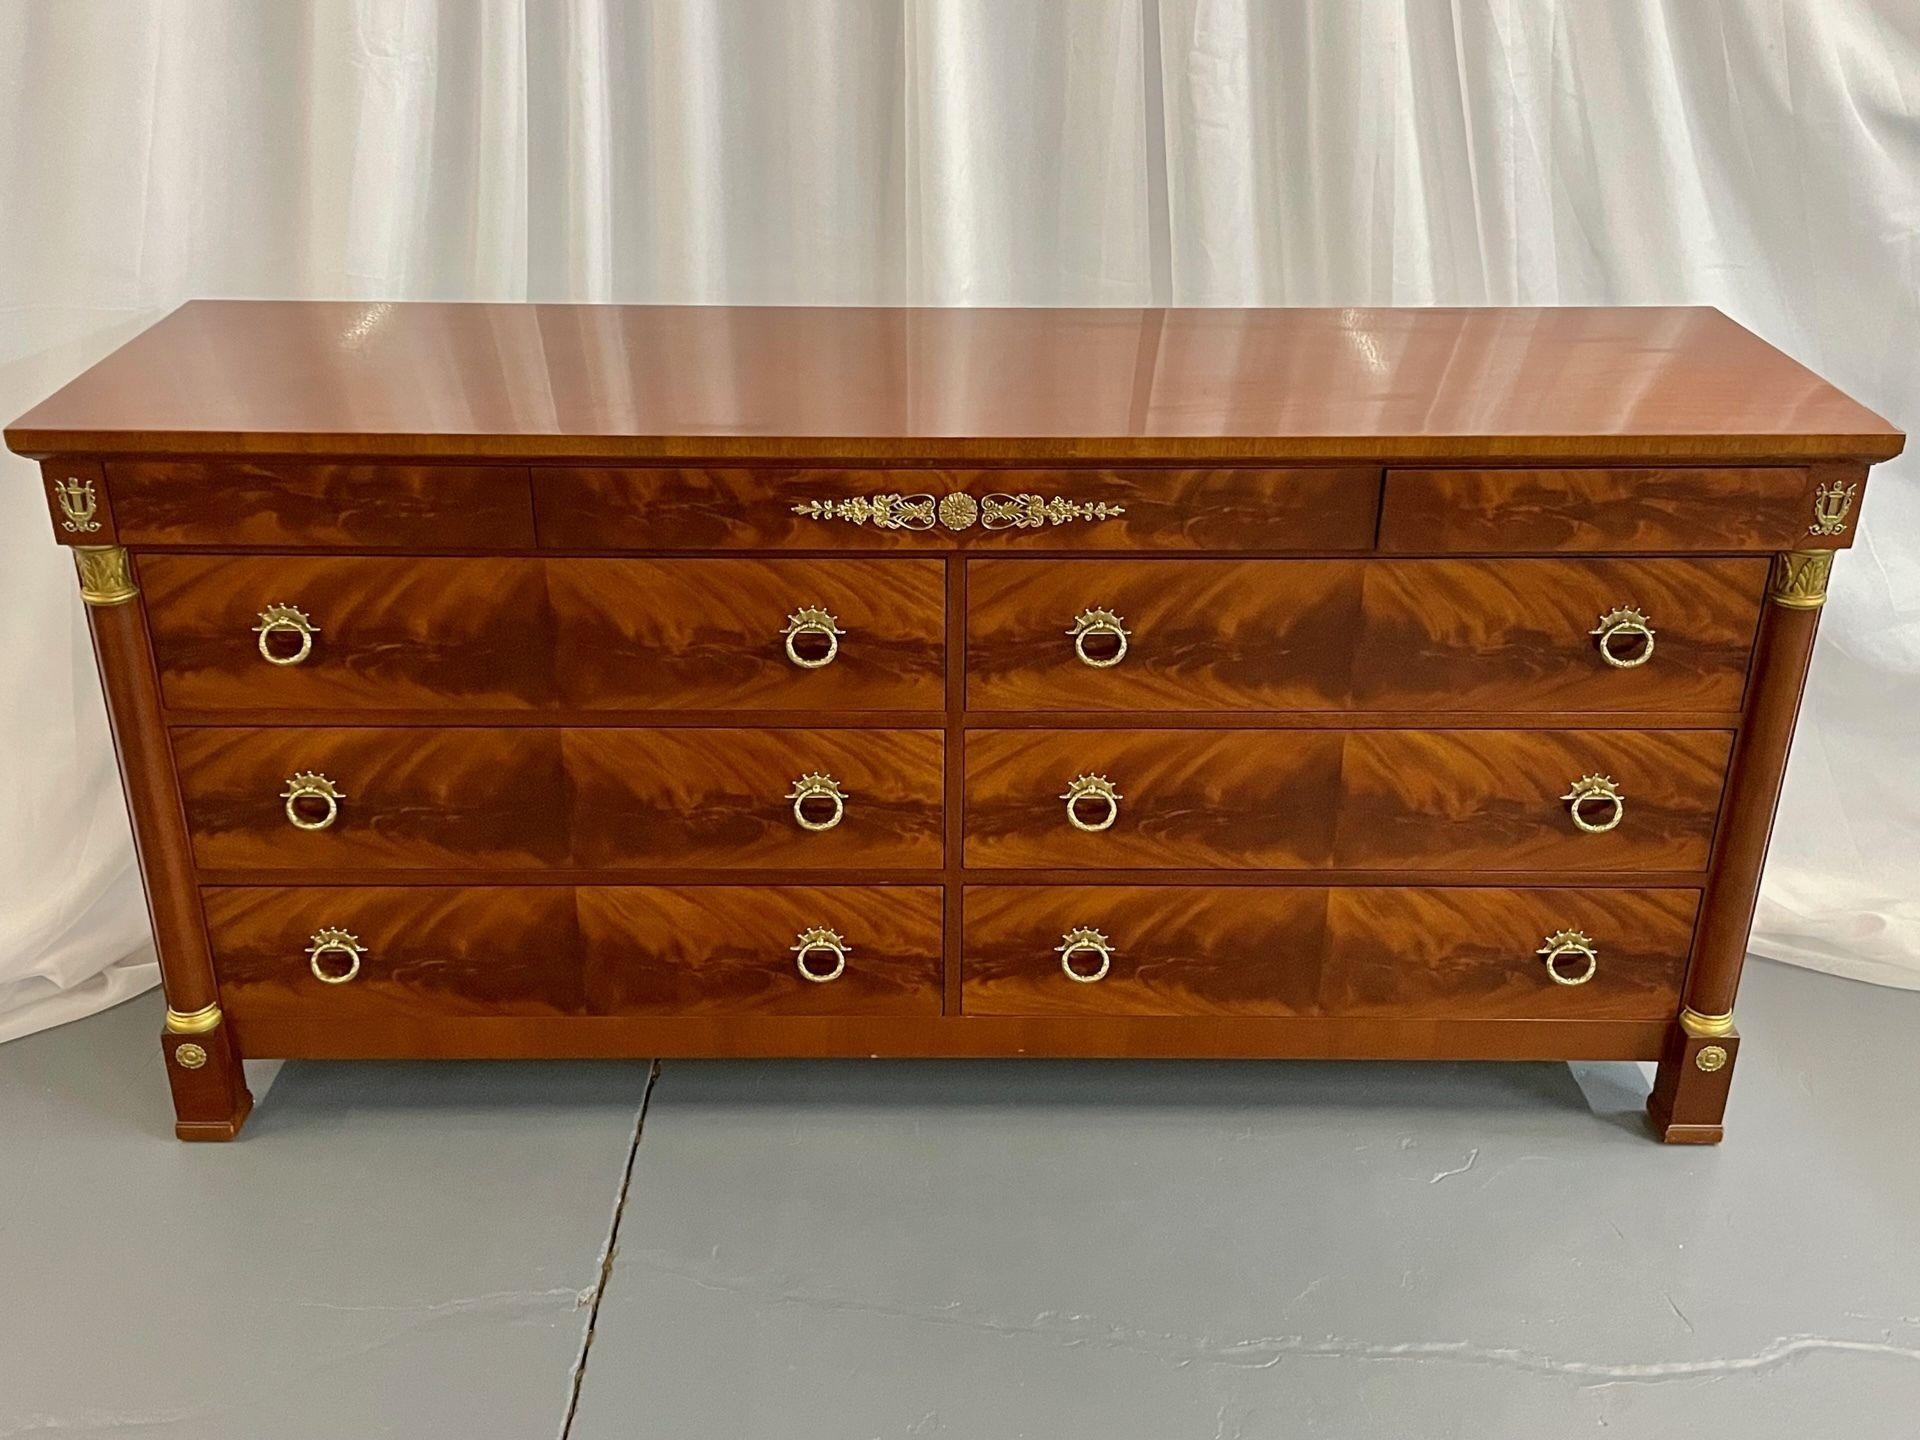 Kindel neoclassical Collection gilt brass mounted flame Mahogany double dresser
 
Flame mahogany dresser, sideboard having three smaller drawers on top of a double commode of three by three drawers all in a flame mahogany finish with bronze pulls